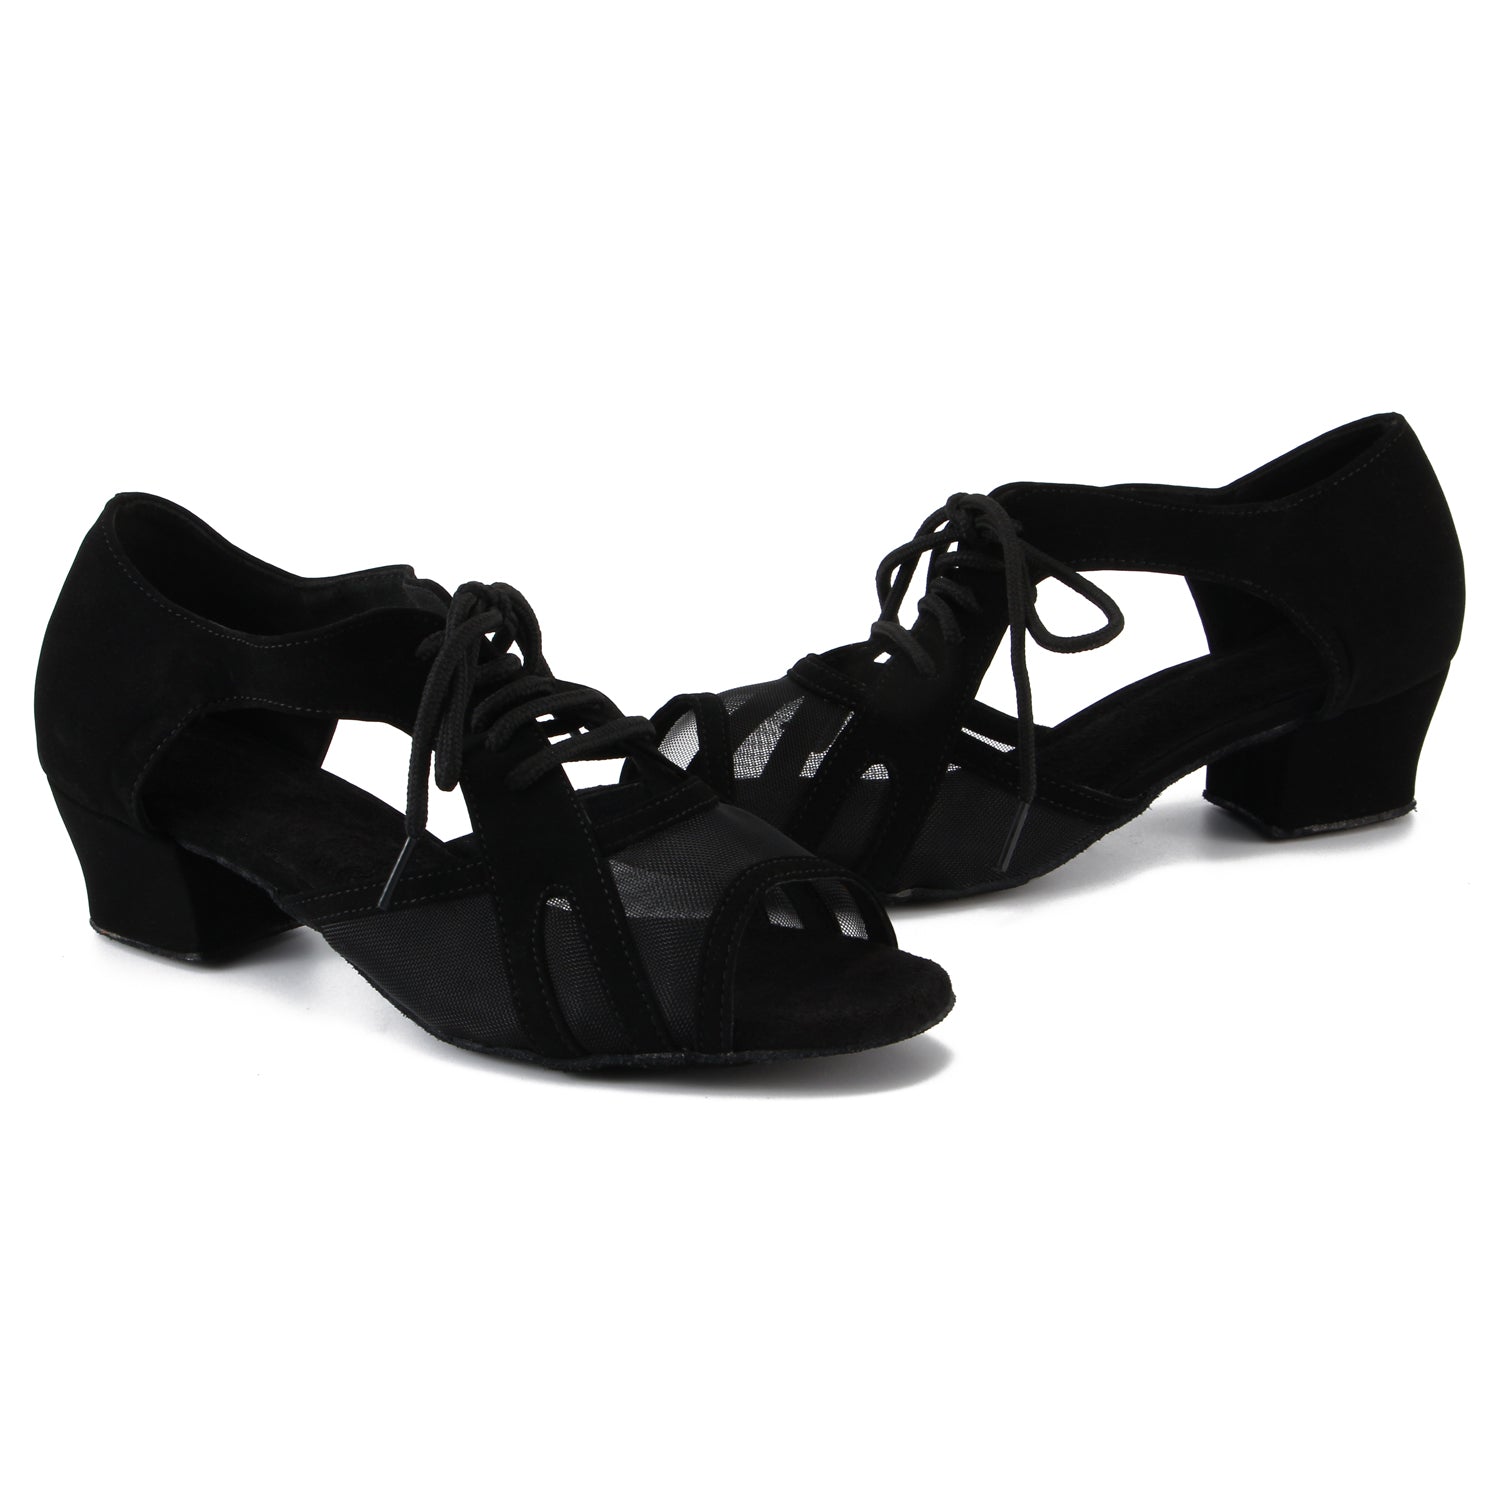 Women Ballroom Dancing Shoes with Suede Sole, Lace-up Open-toe Design in Black for Tango Latin Practice - PD-3002A2